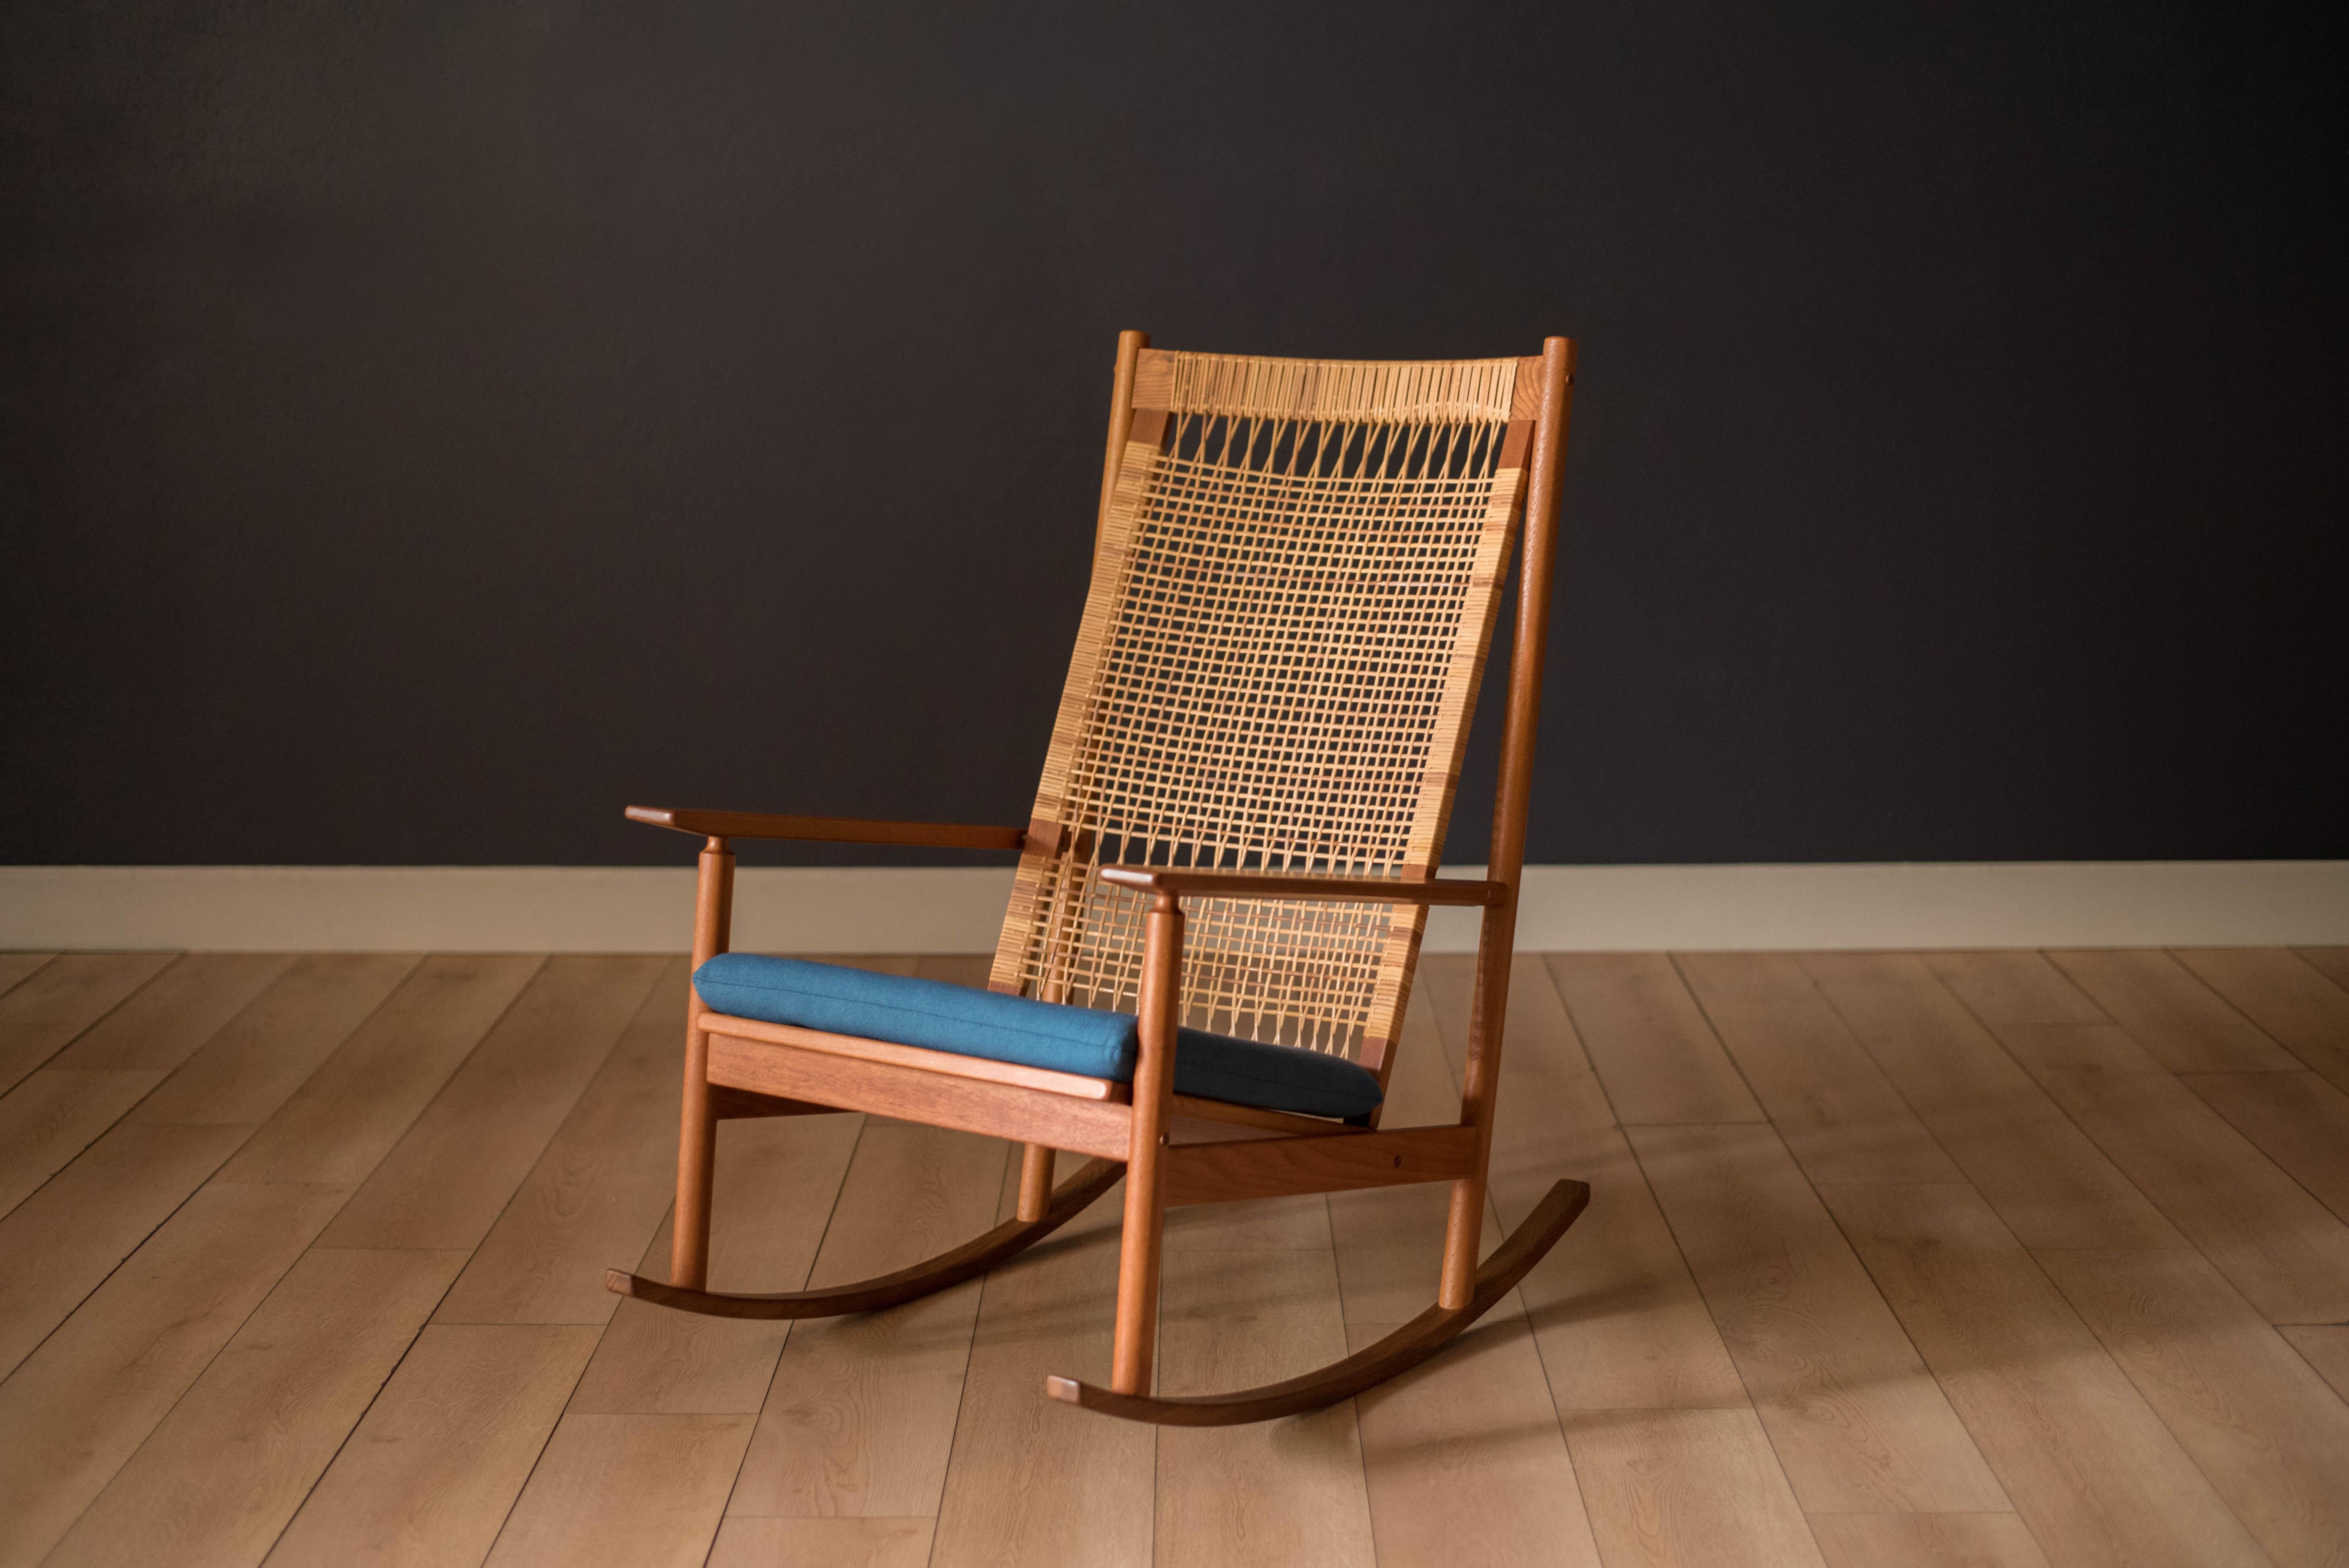 Mid-Century Modern DUX rocking armchair designed by Hans Olsen for Juul Kristensen, circa 1960's. This piece features a natural cane tall backrest with sculpted teak and brass details. The seat cushion has been reupholstered in a blue tweed